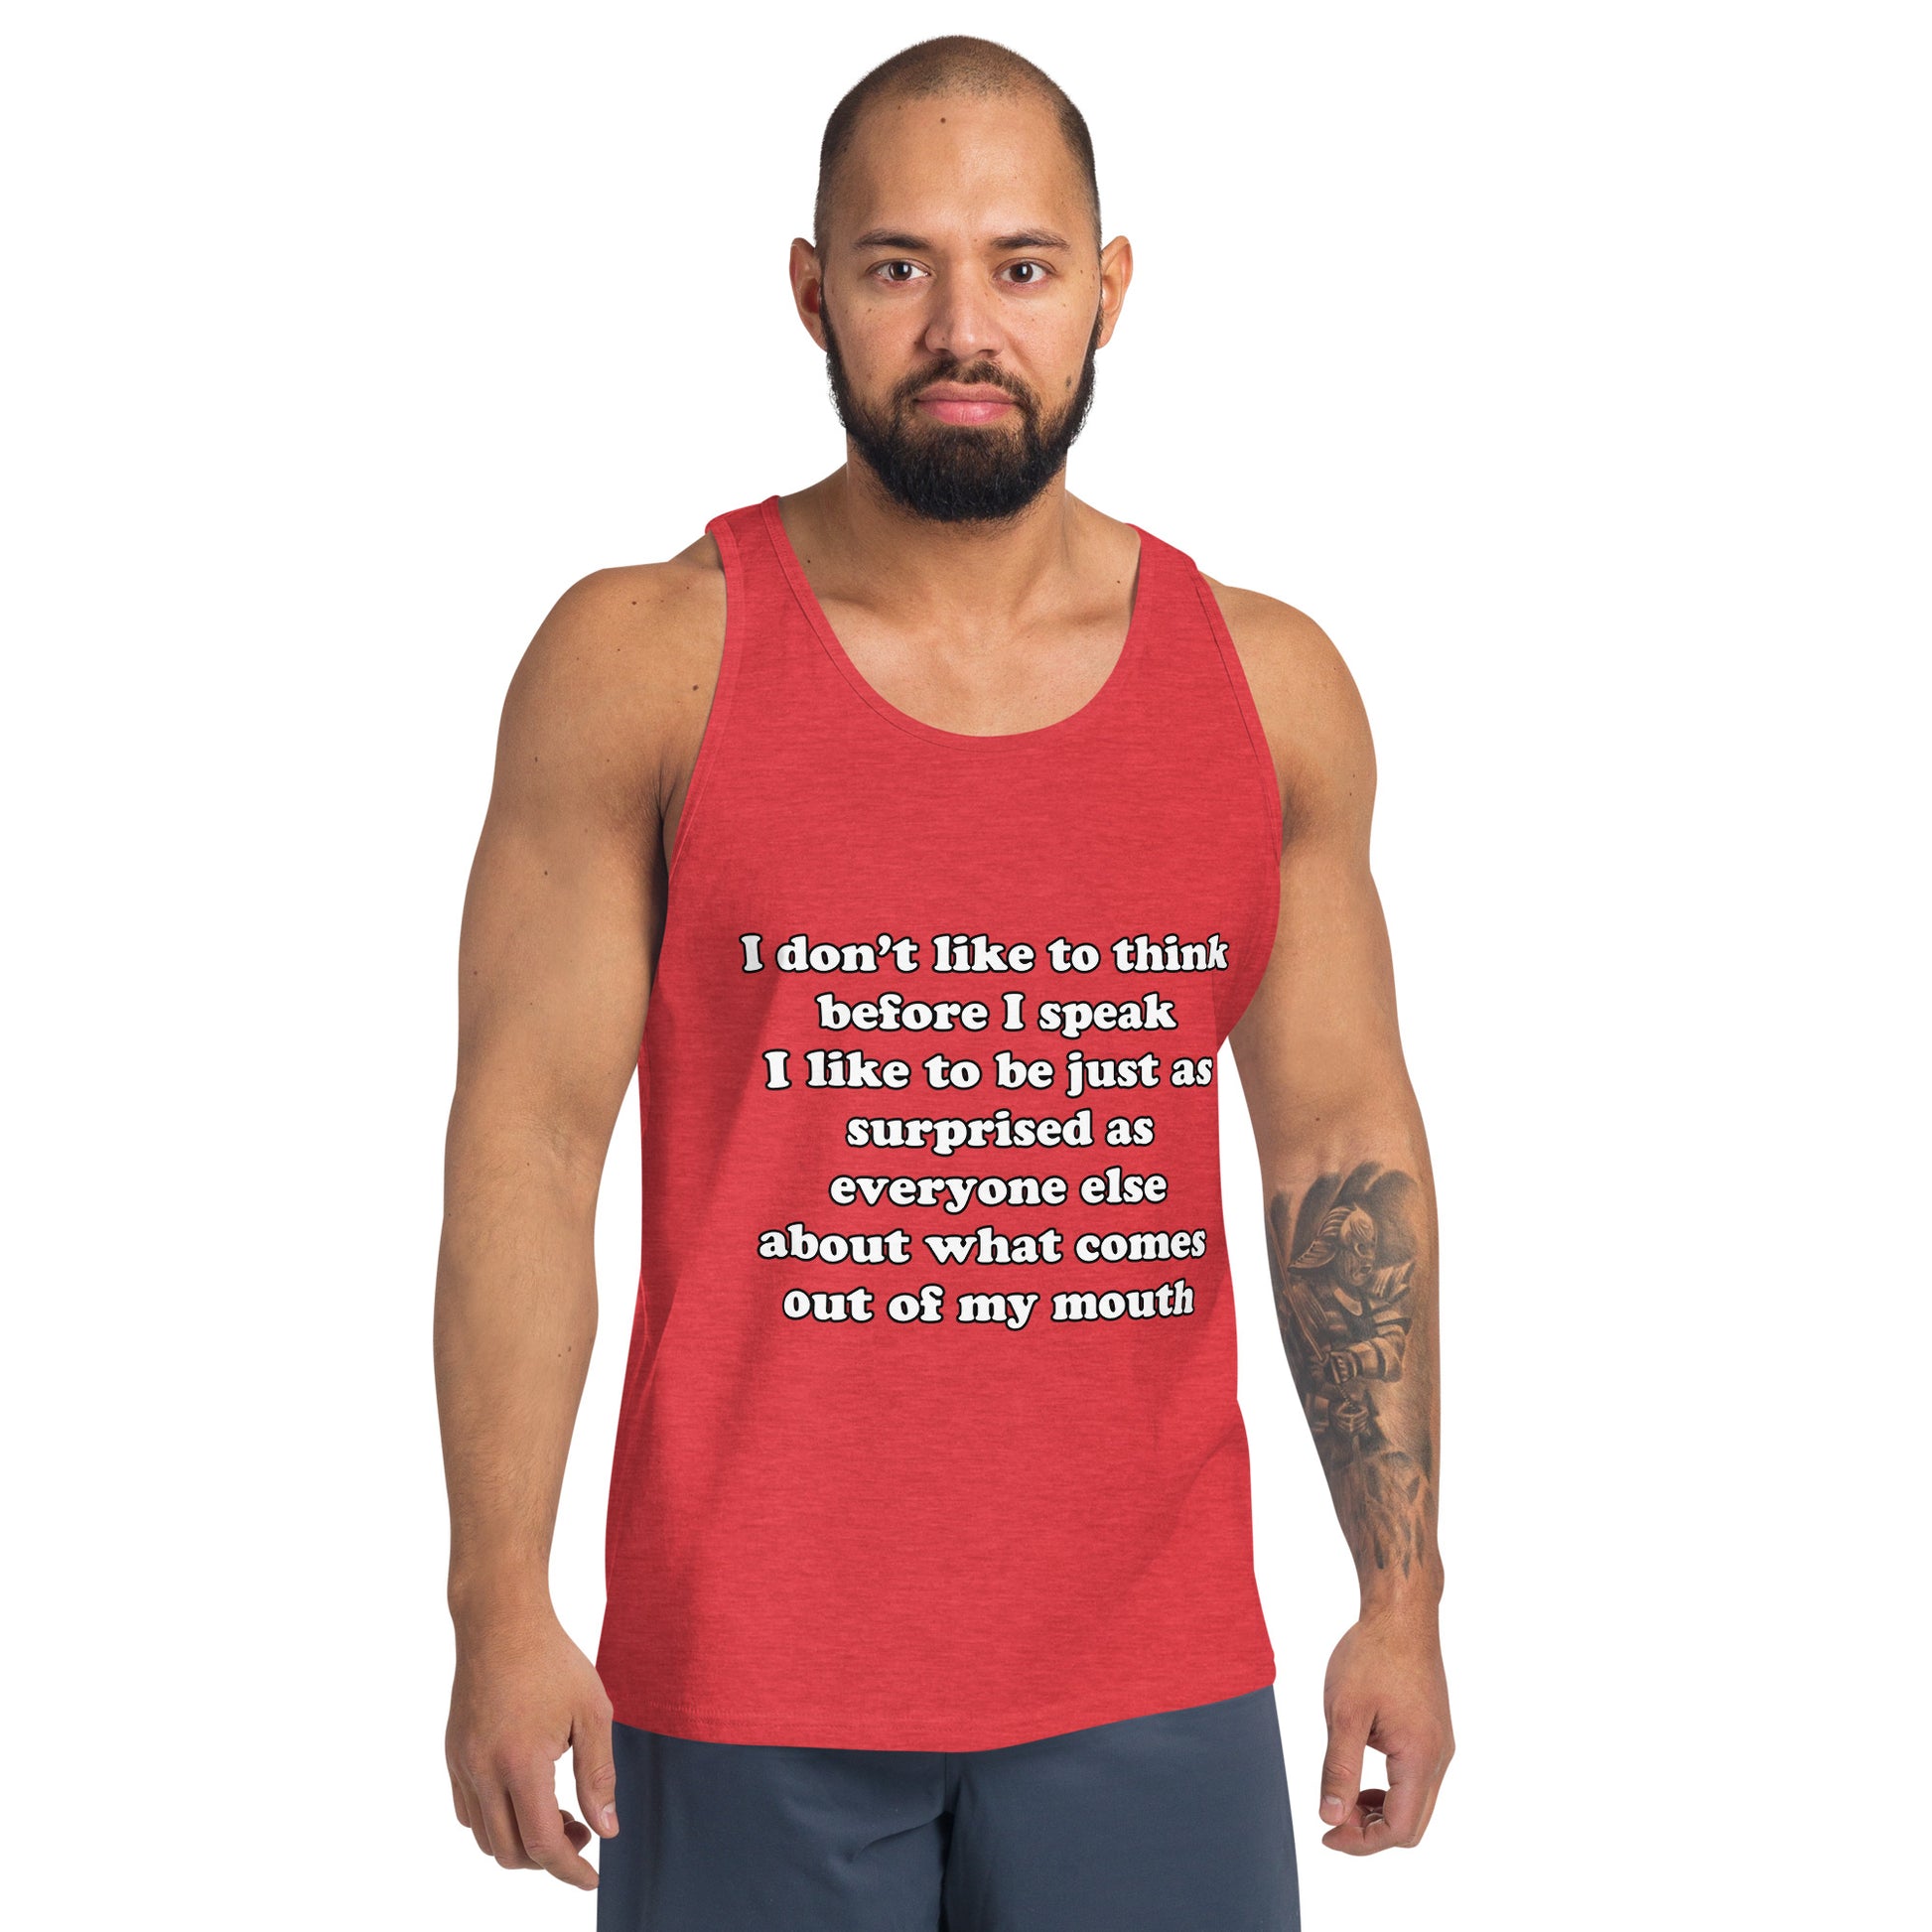 Man with red tank top with text “I don't think before I speak Just as serprised as everyone about what comes out of my mouth"